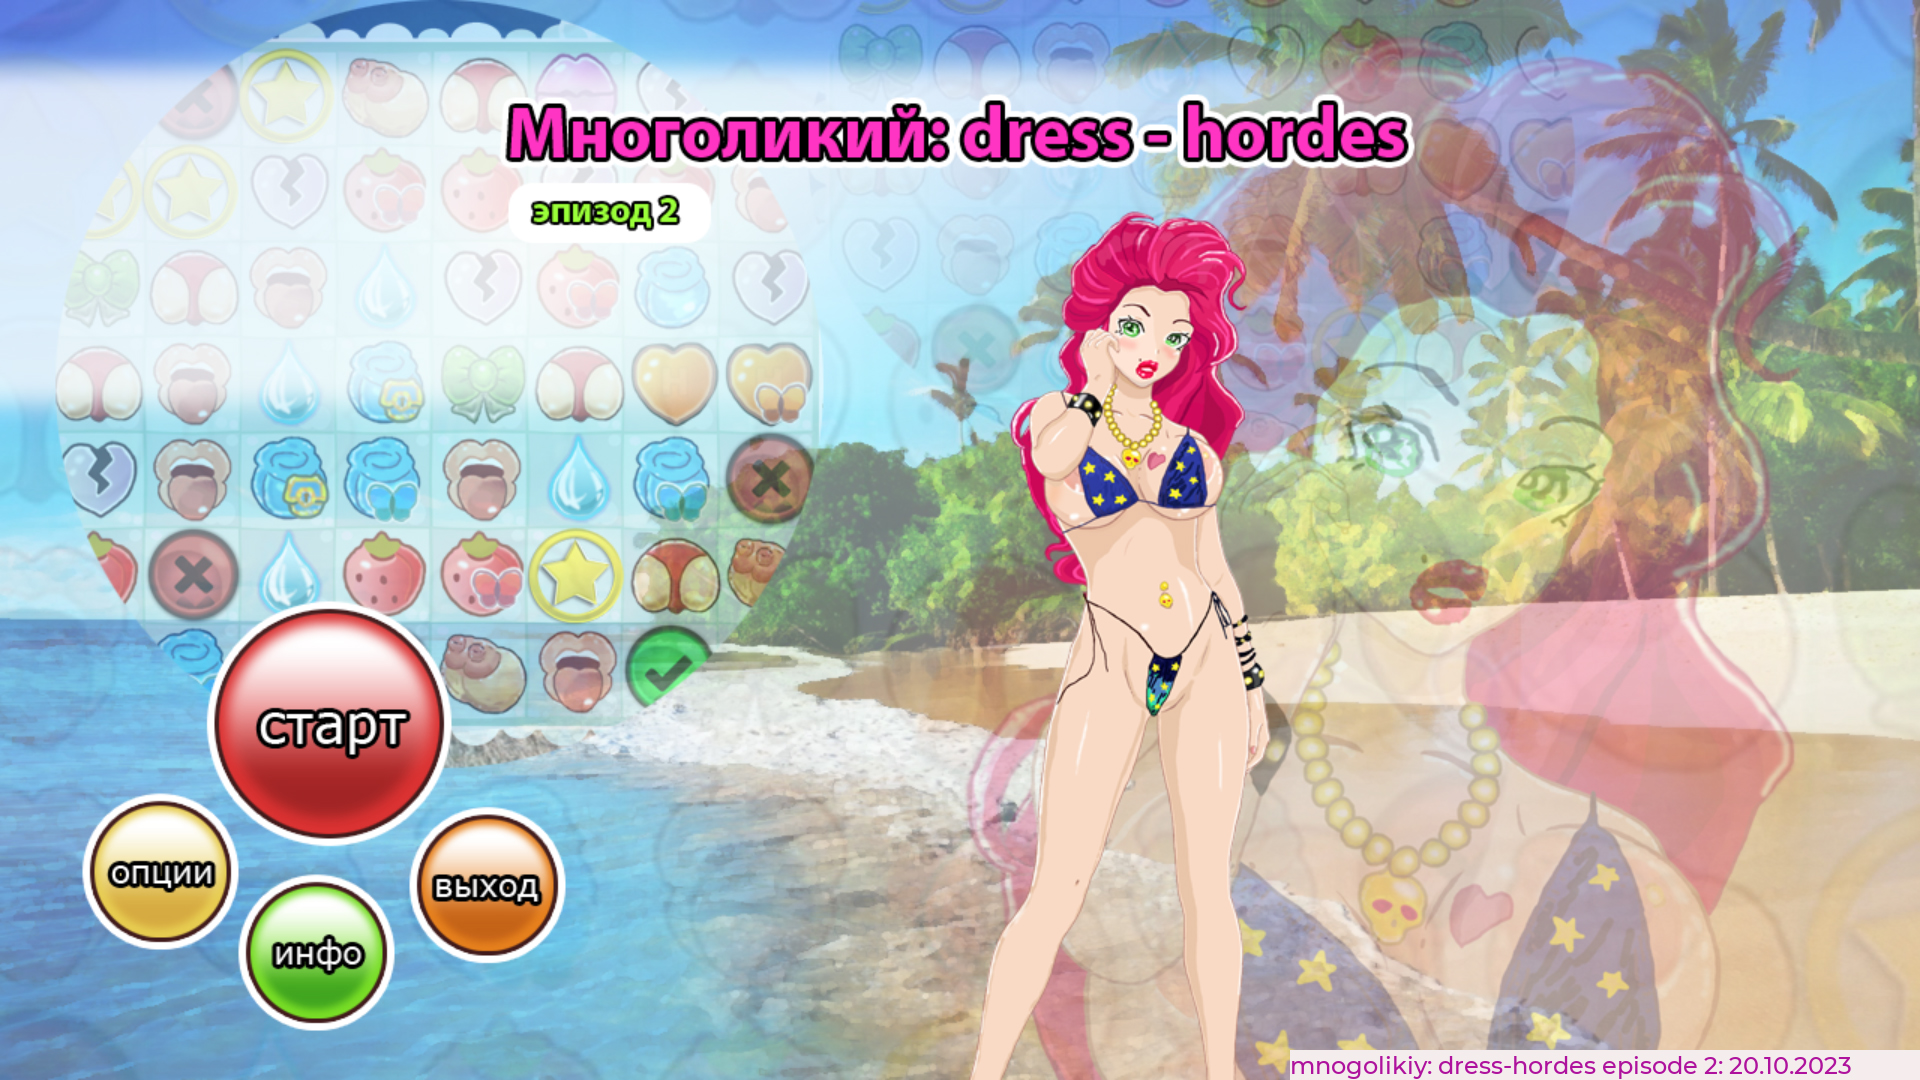 : dress - hordes win/linux/android/html5    20.10.2023